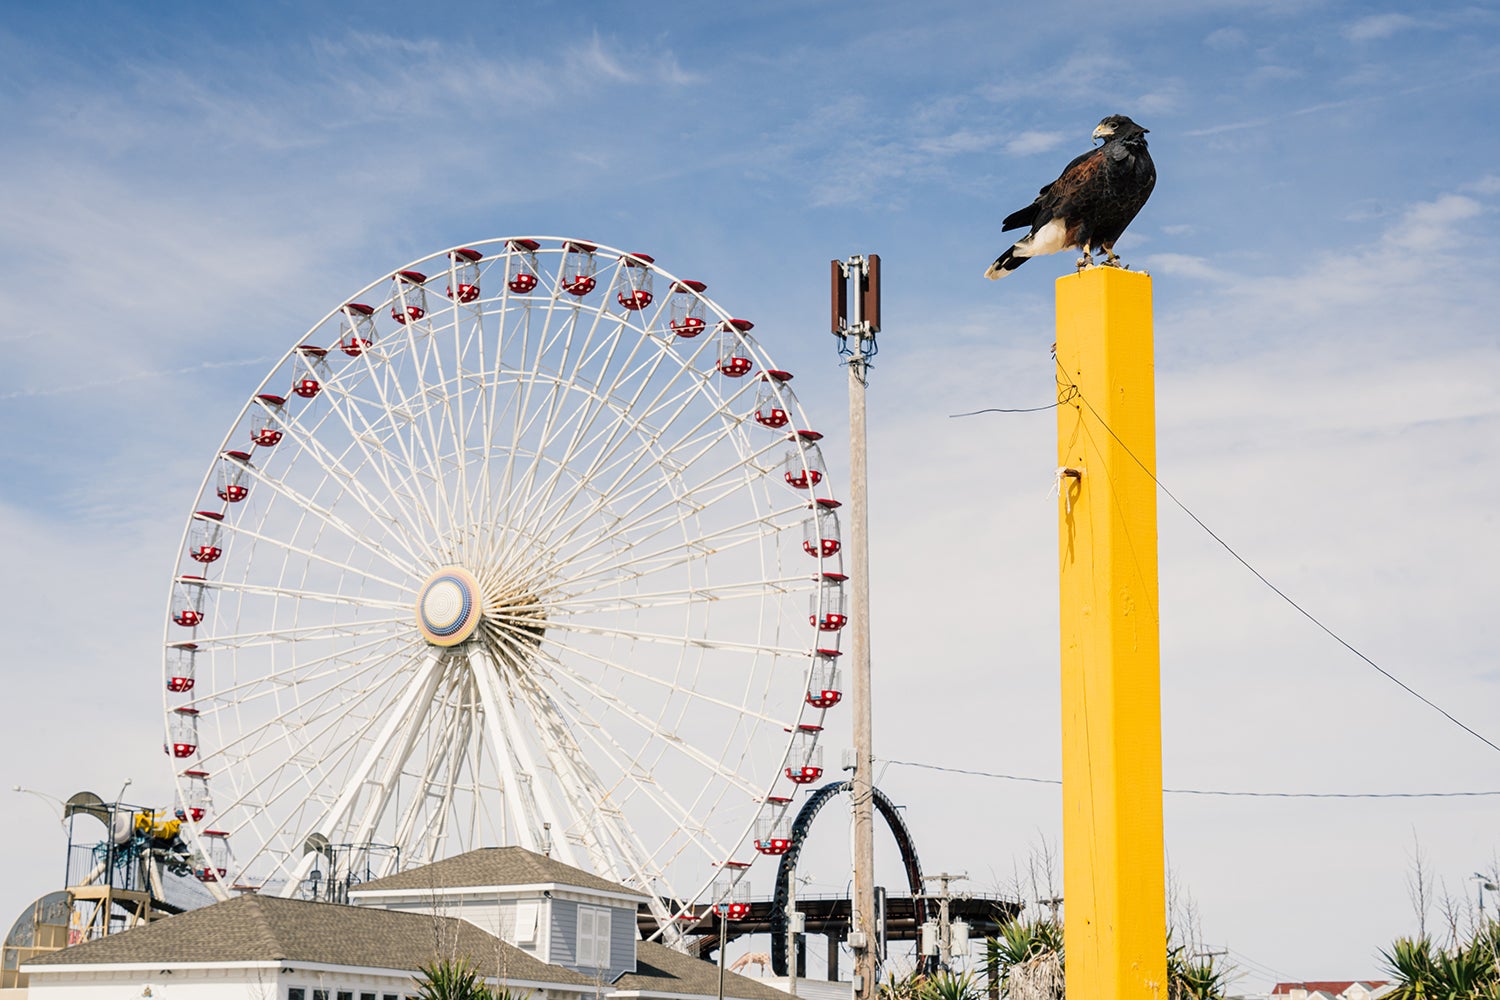 Breaking News hawk sits atop yellow post with ferris wheel in backgtound